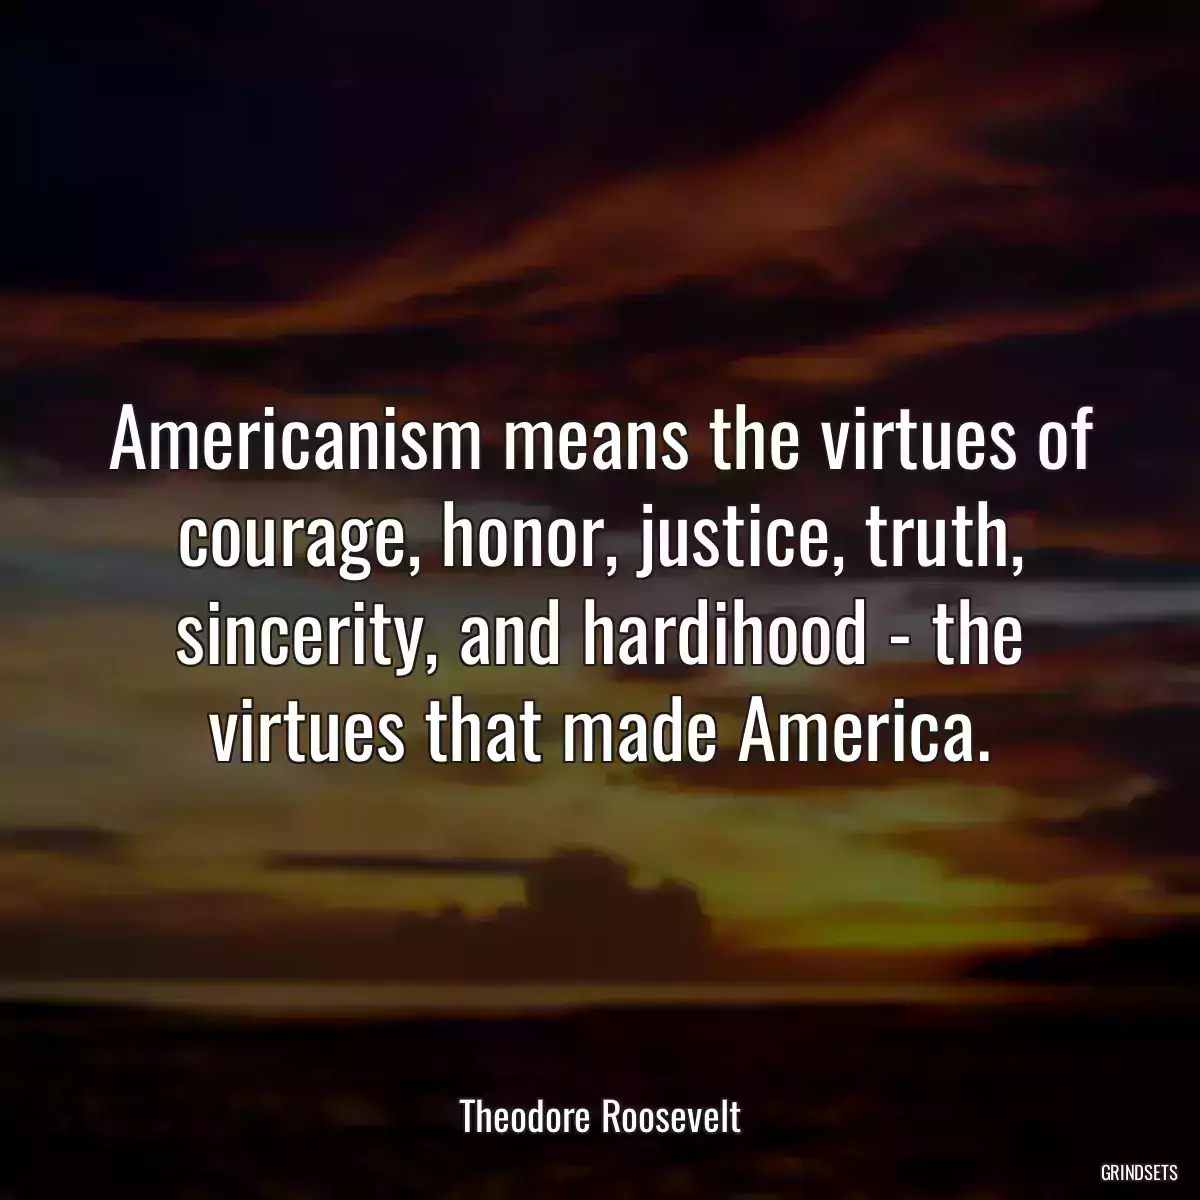 Americanism means the virtues of courage, honor, justice, truth, sincerity, and hardihood - the virtues that made America.